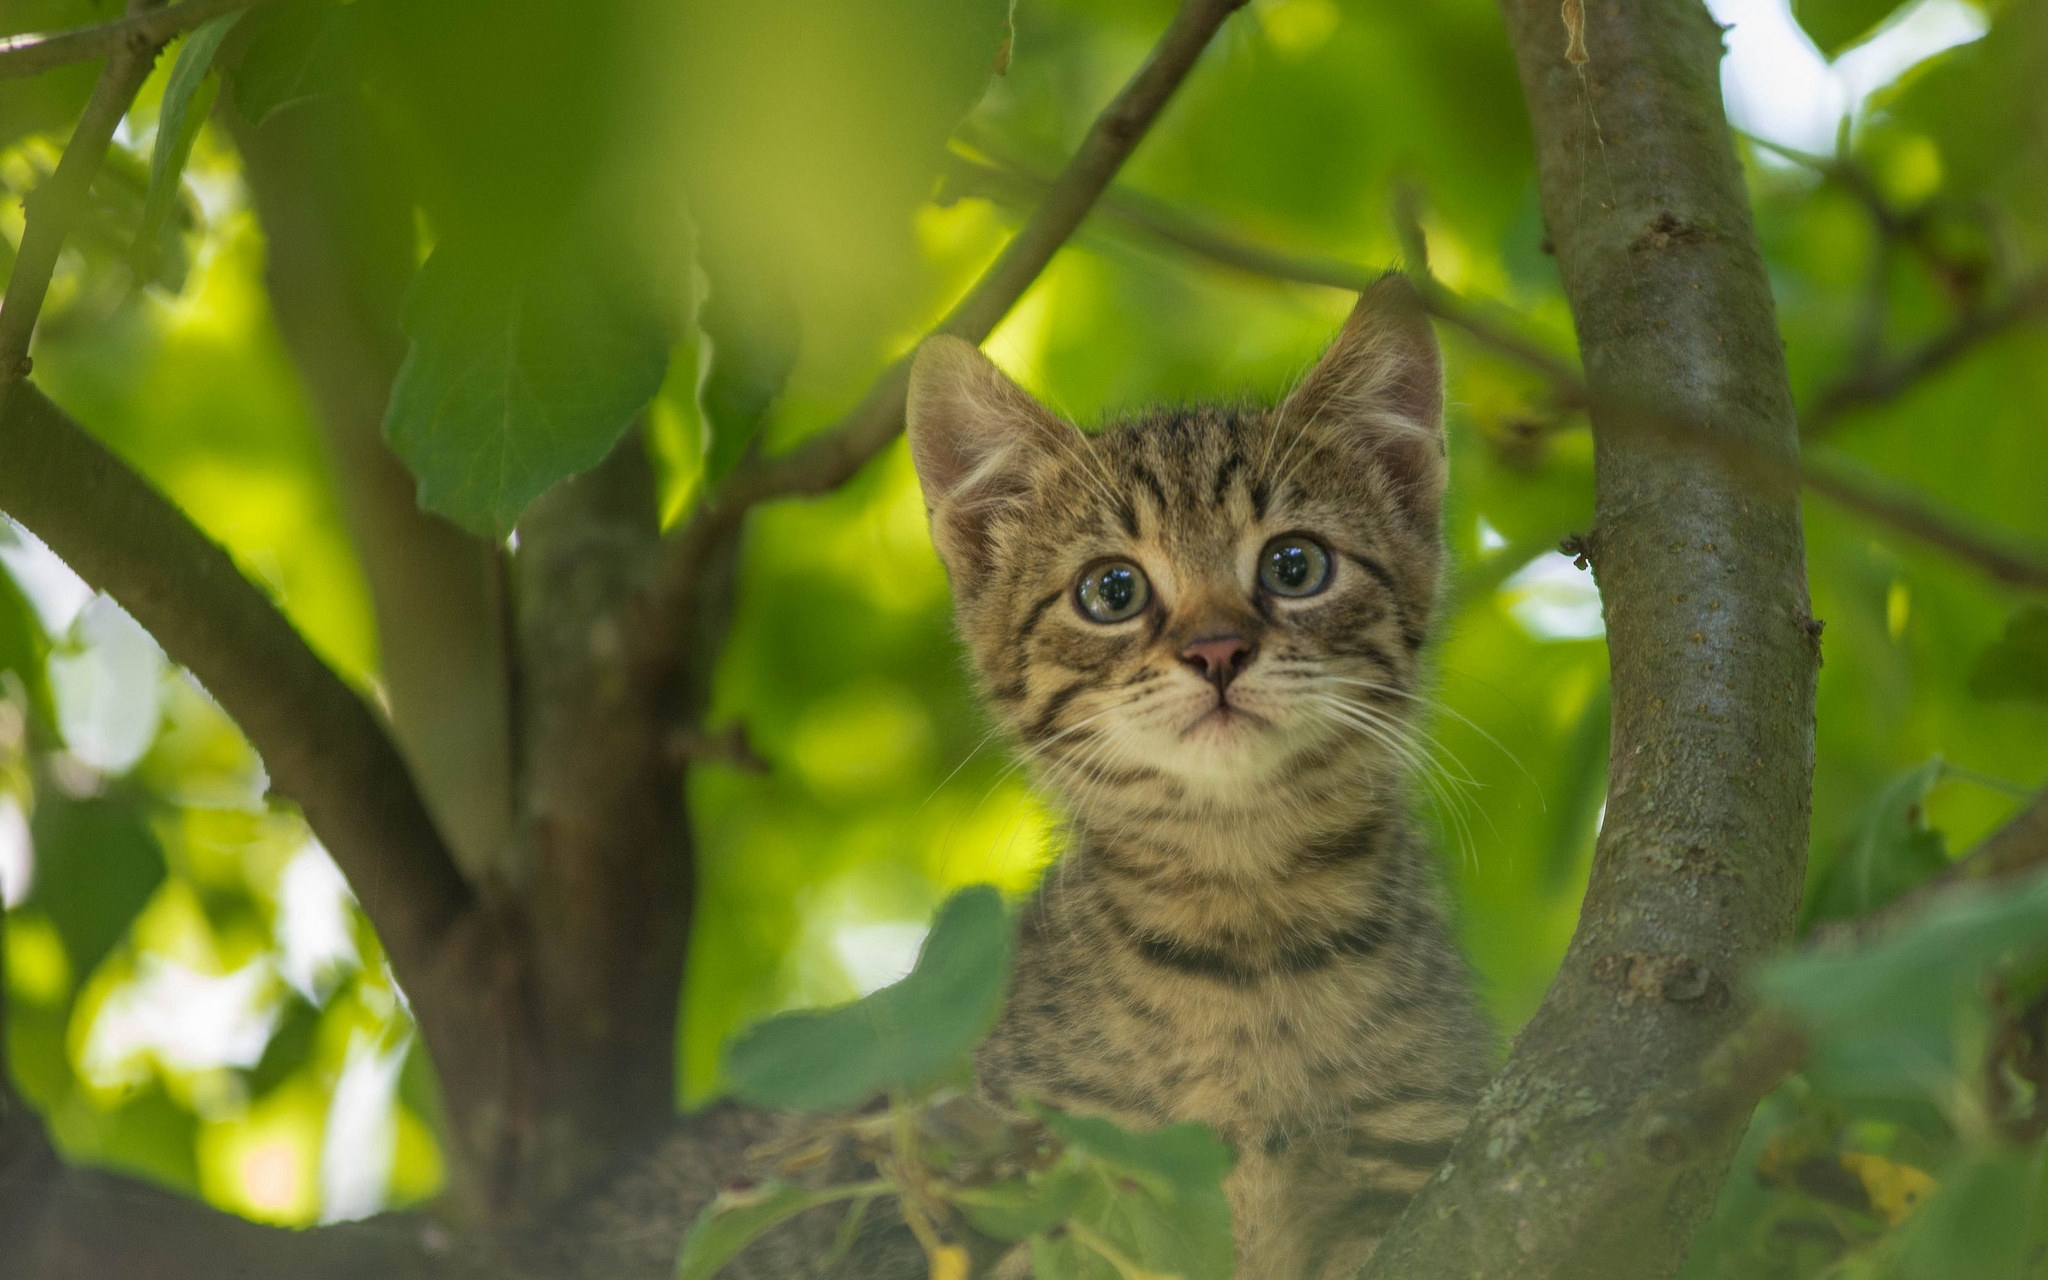 A curious kitten in a tree